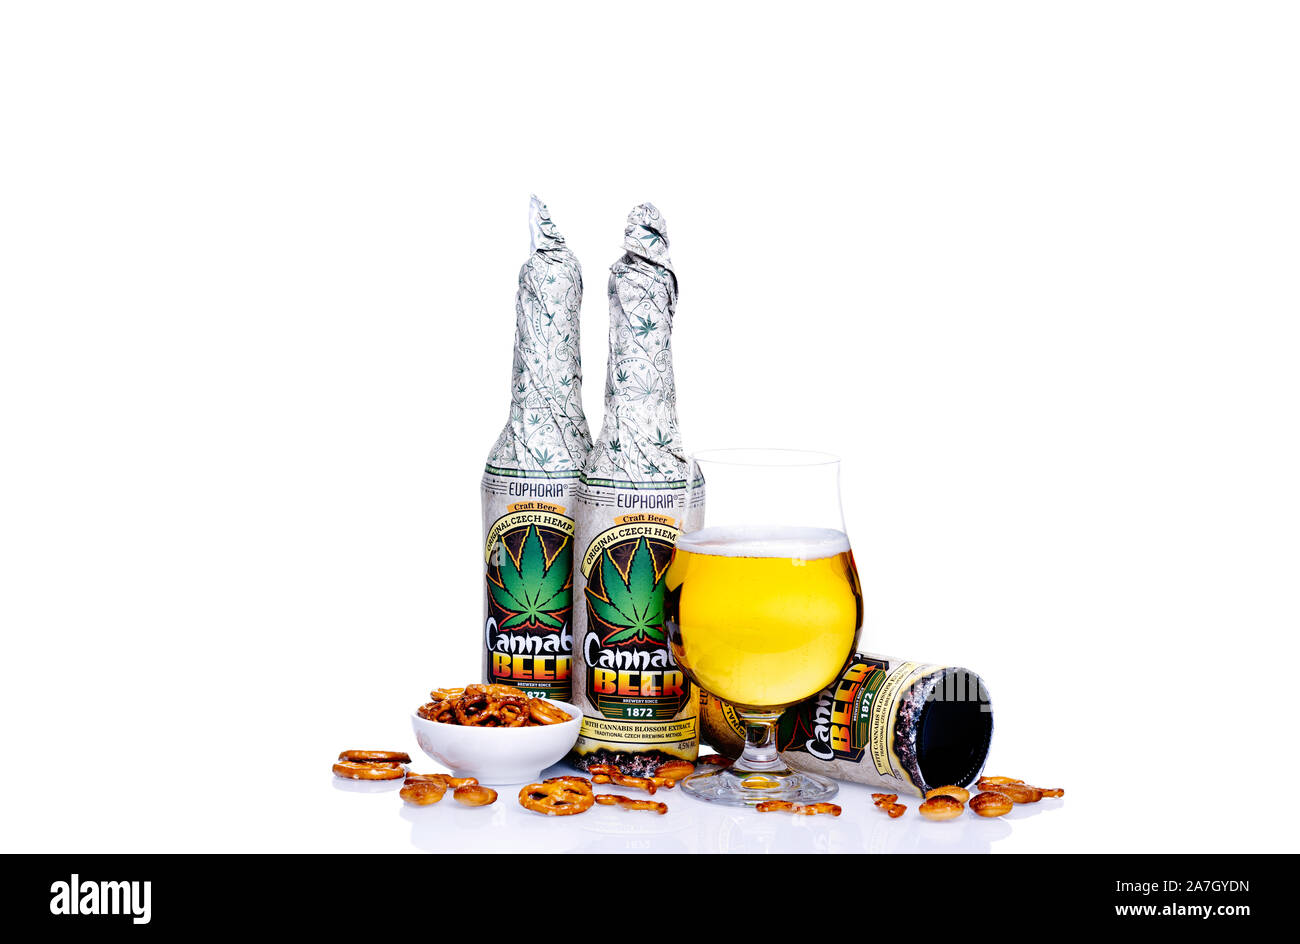 Cannabis beer Euphoria and snacks on the glass table against white background. Stock Photo